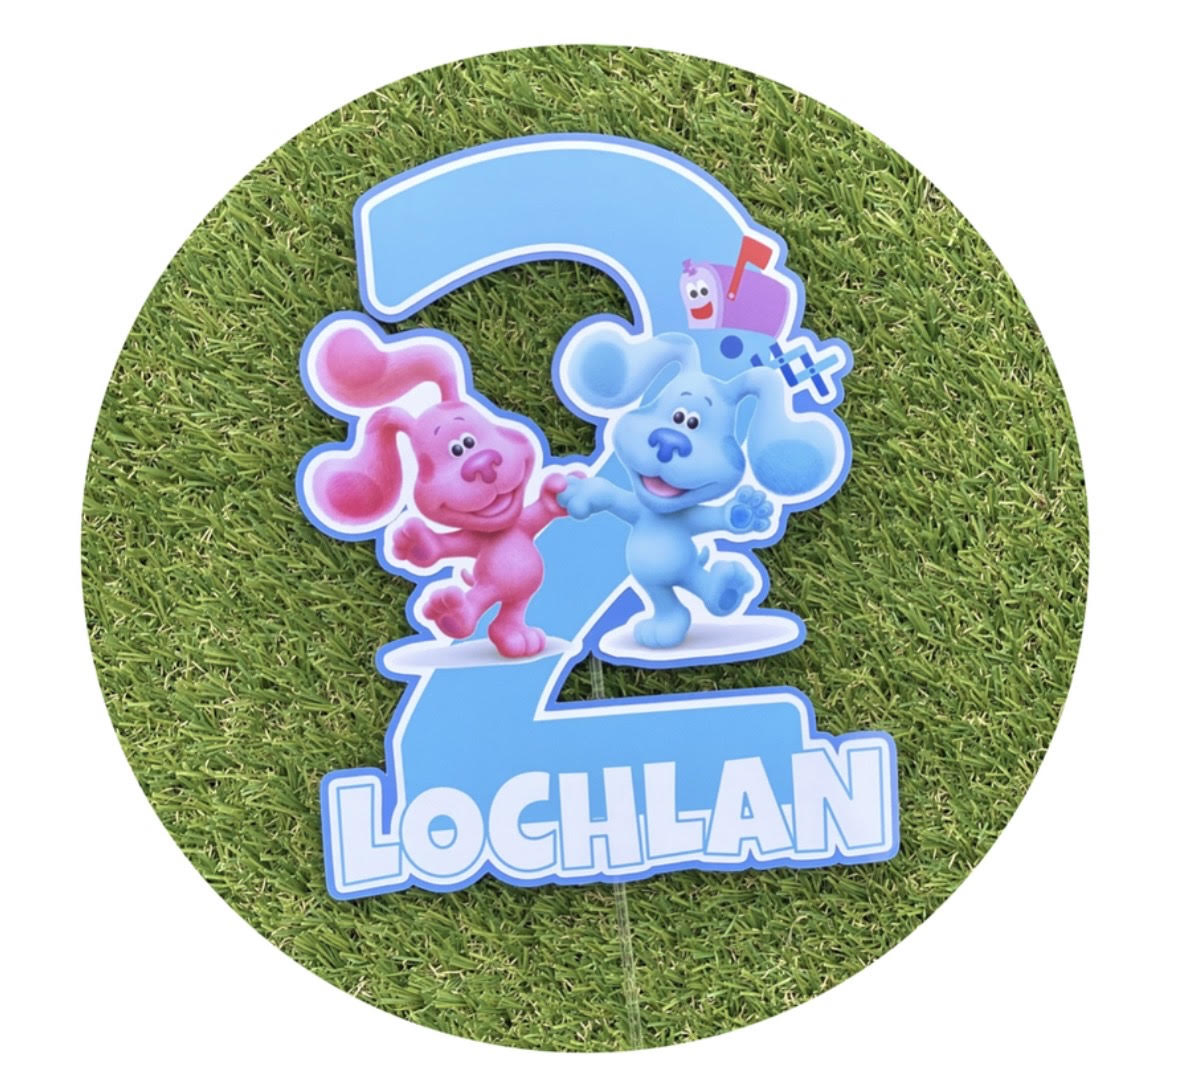 Blues Clues Personalised Cake Topper